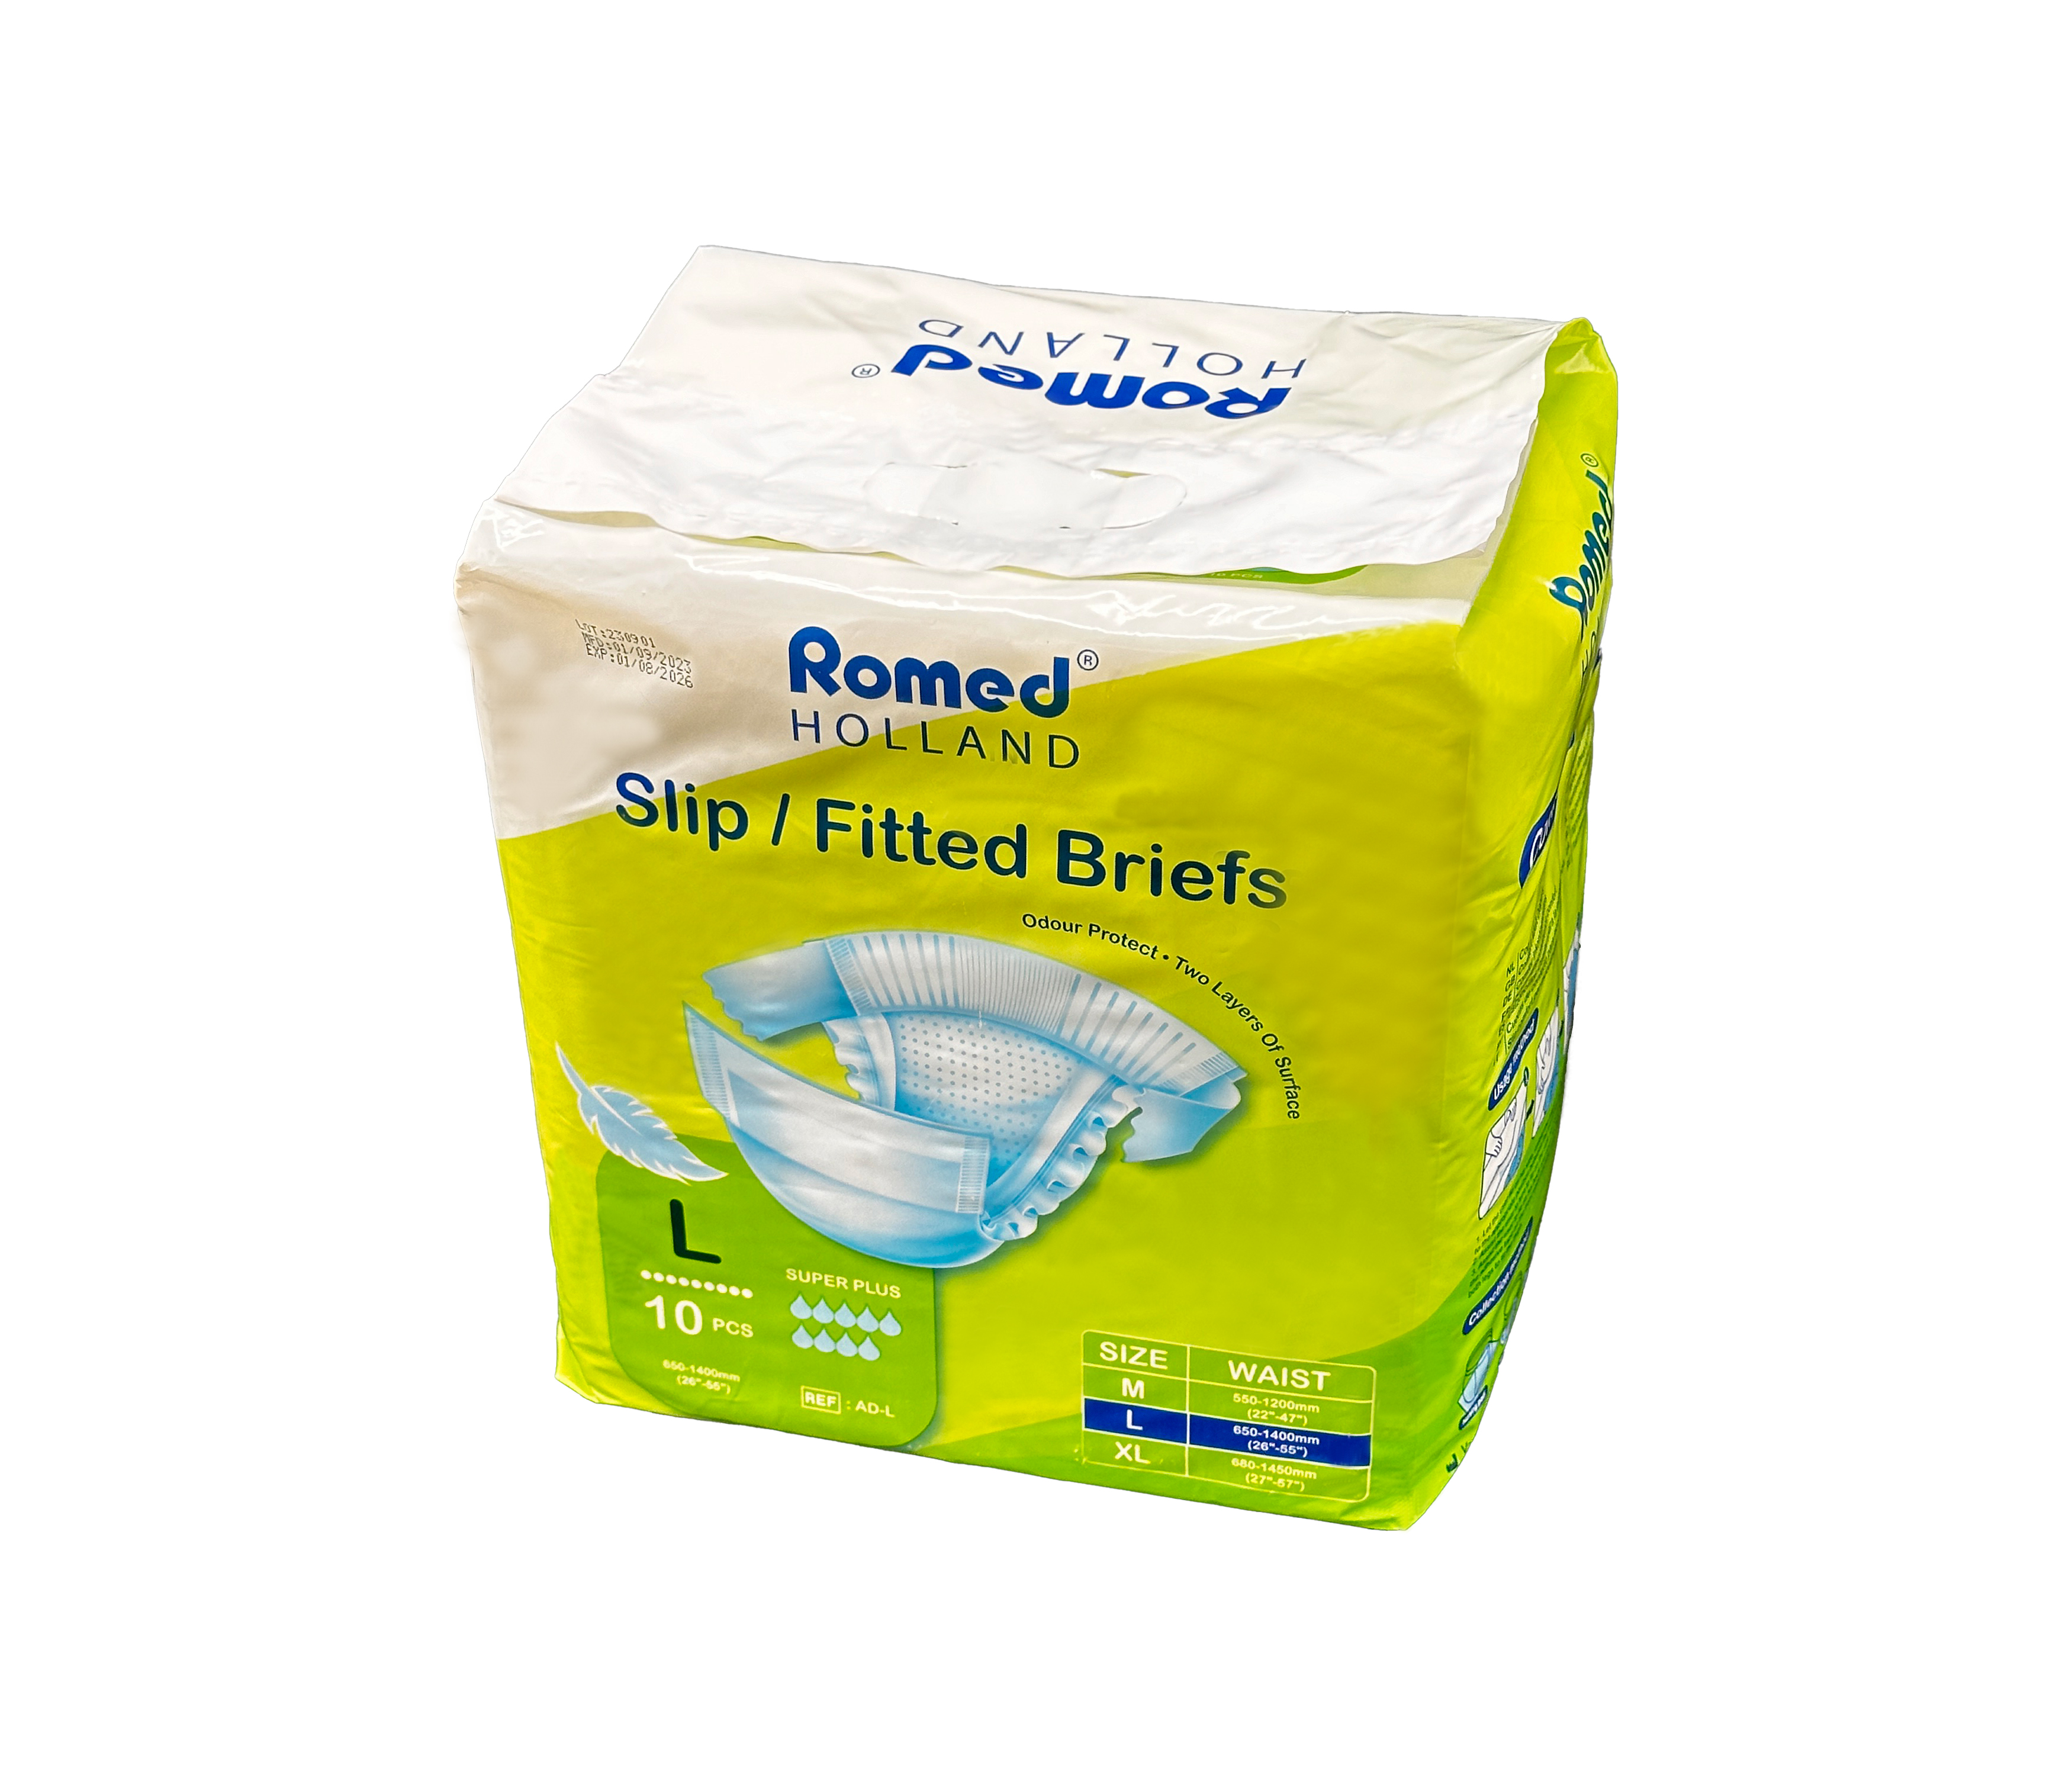 AD-XL Romed Comfort Adult Diapers, extra large, 10 pcs in a bag, 12 bags in a carton.

- Soft feel & Breathable
- Odour Protect
- Two Layers of Surface
- Wetness indicator
- Unisex
- Size: extra large (680-1450mm (27''-57'')